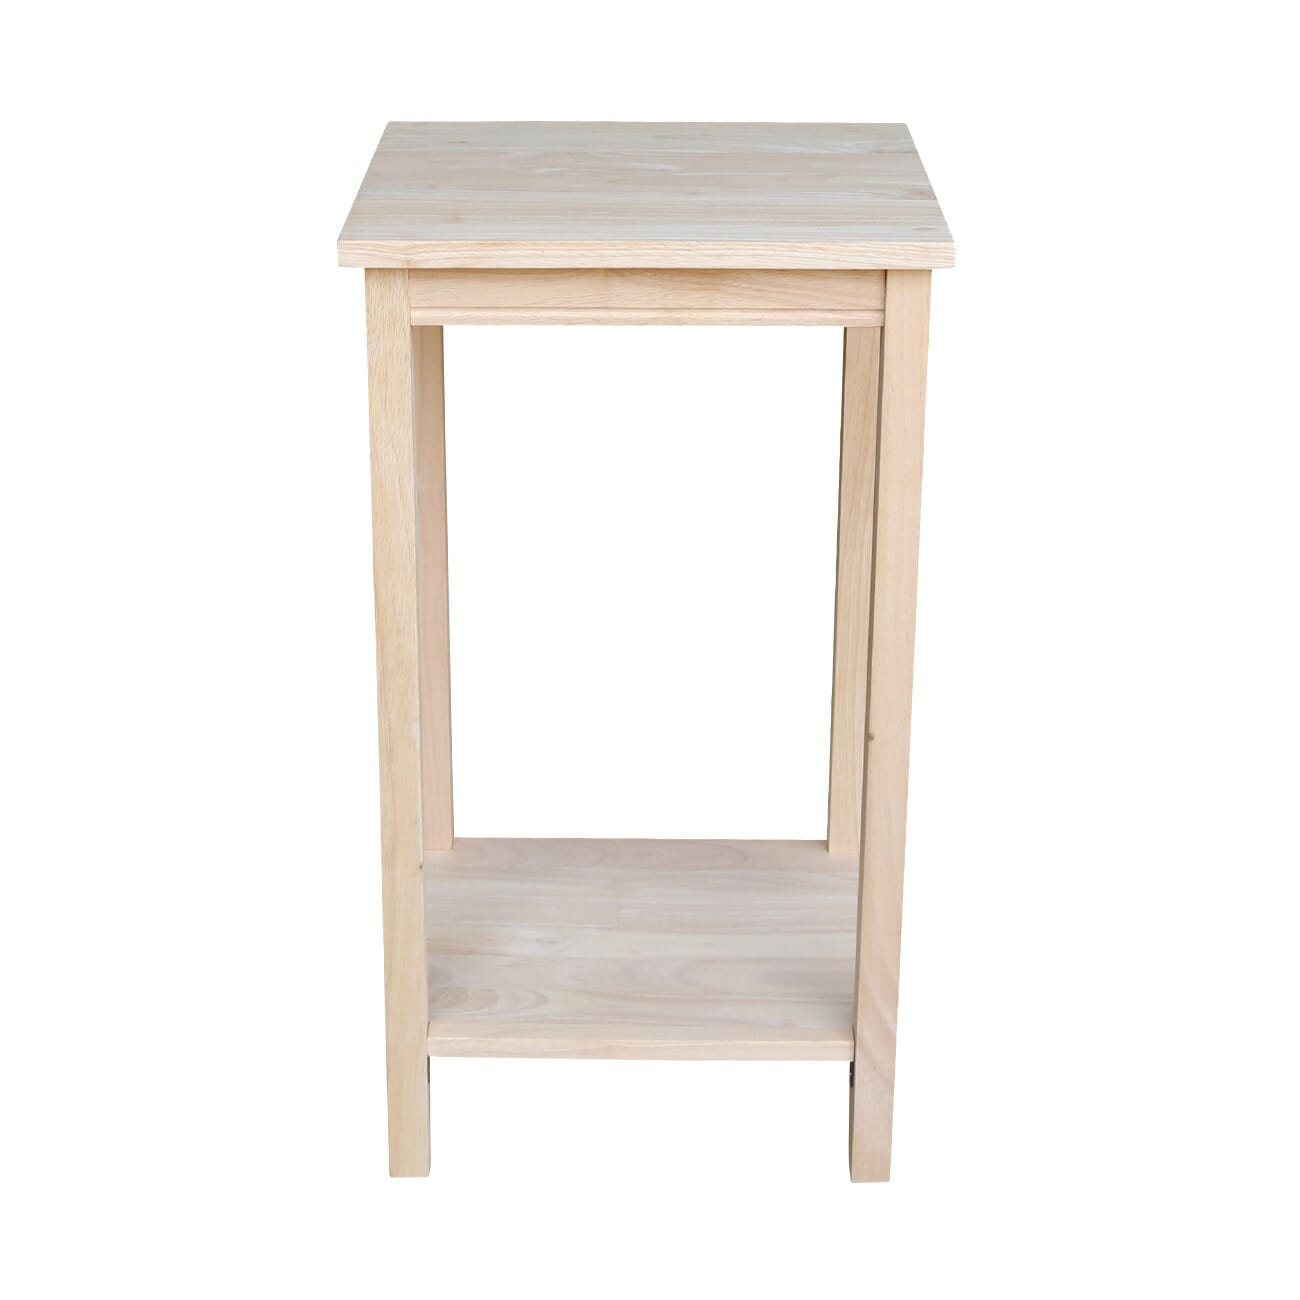 OT-42 Portman 29″ Side Table with Free Shipping